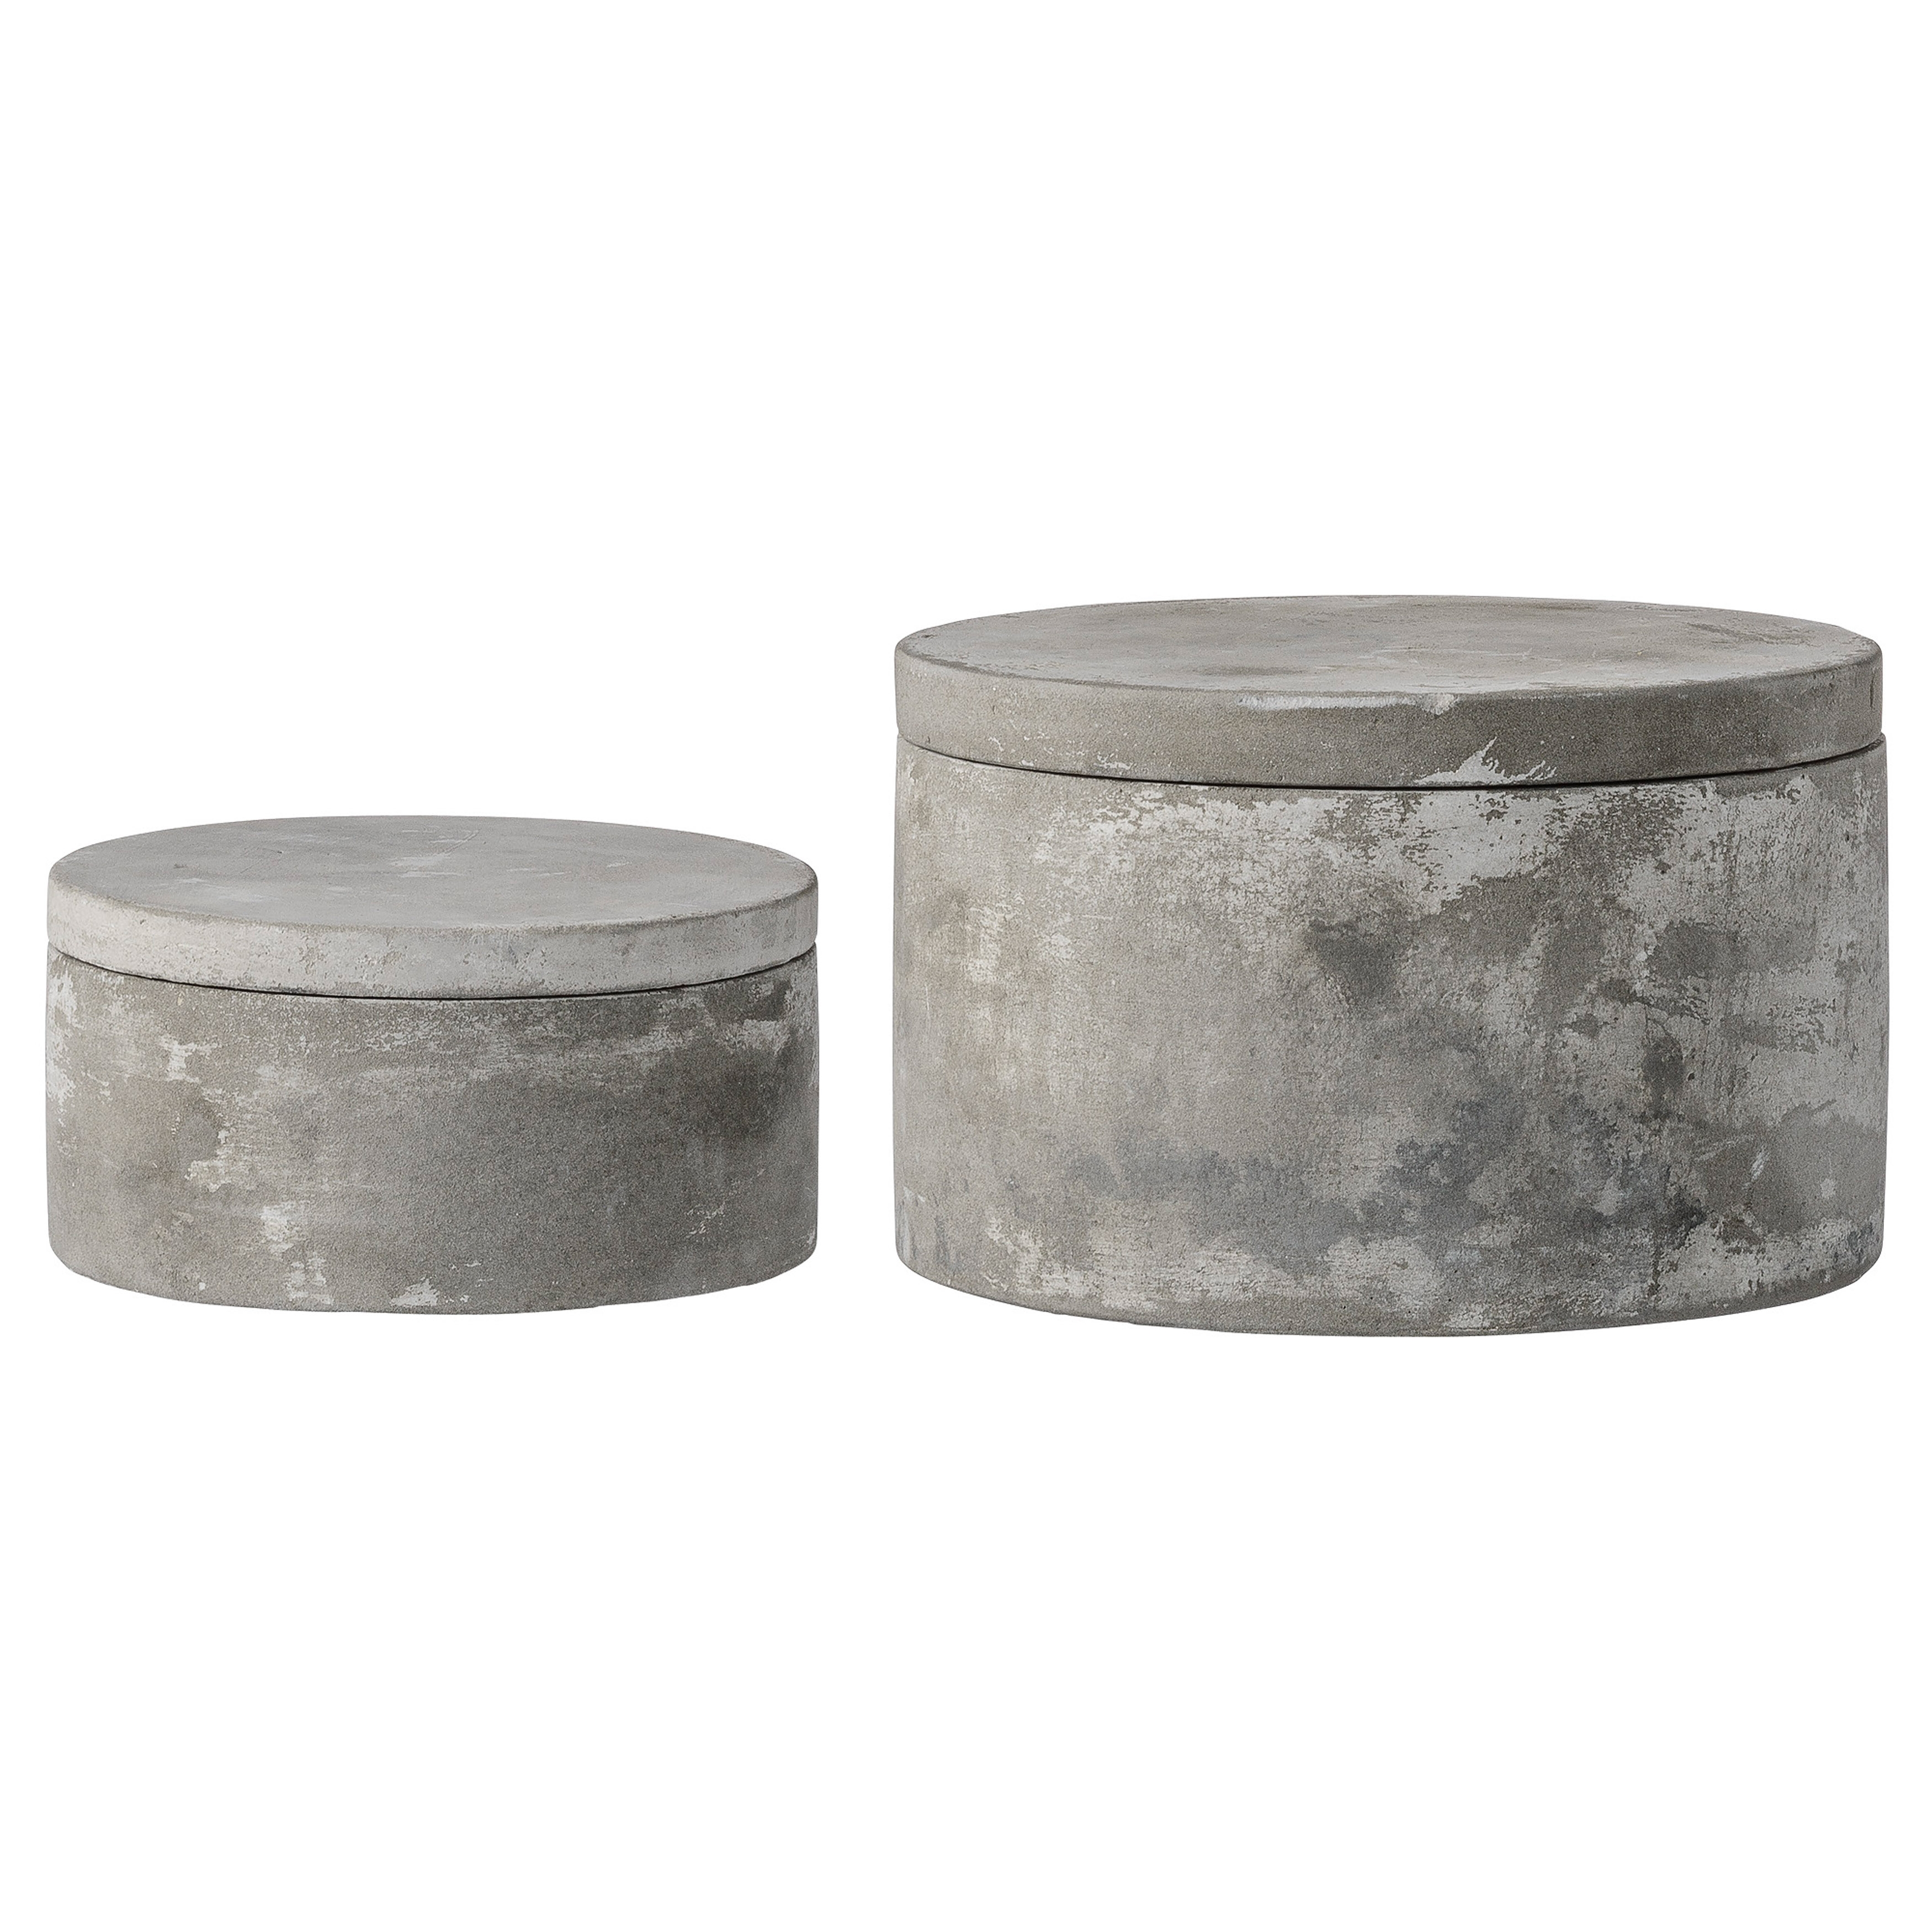 Set of 2 Grey Round Decorative Cement Boxes with Lids - Image 0